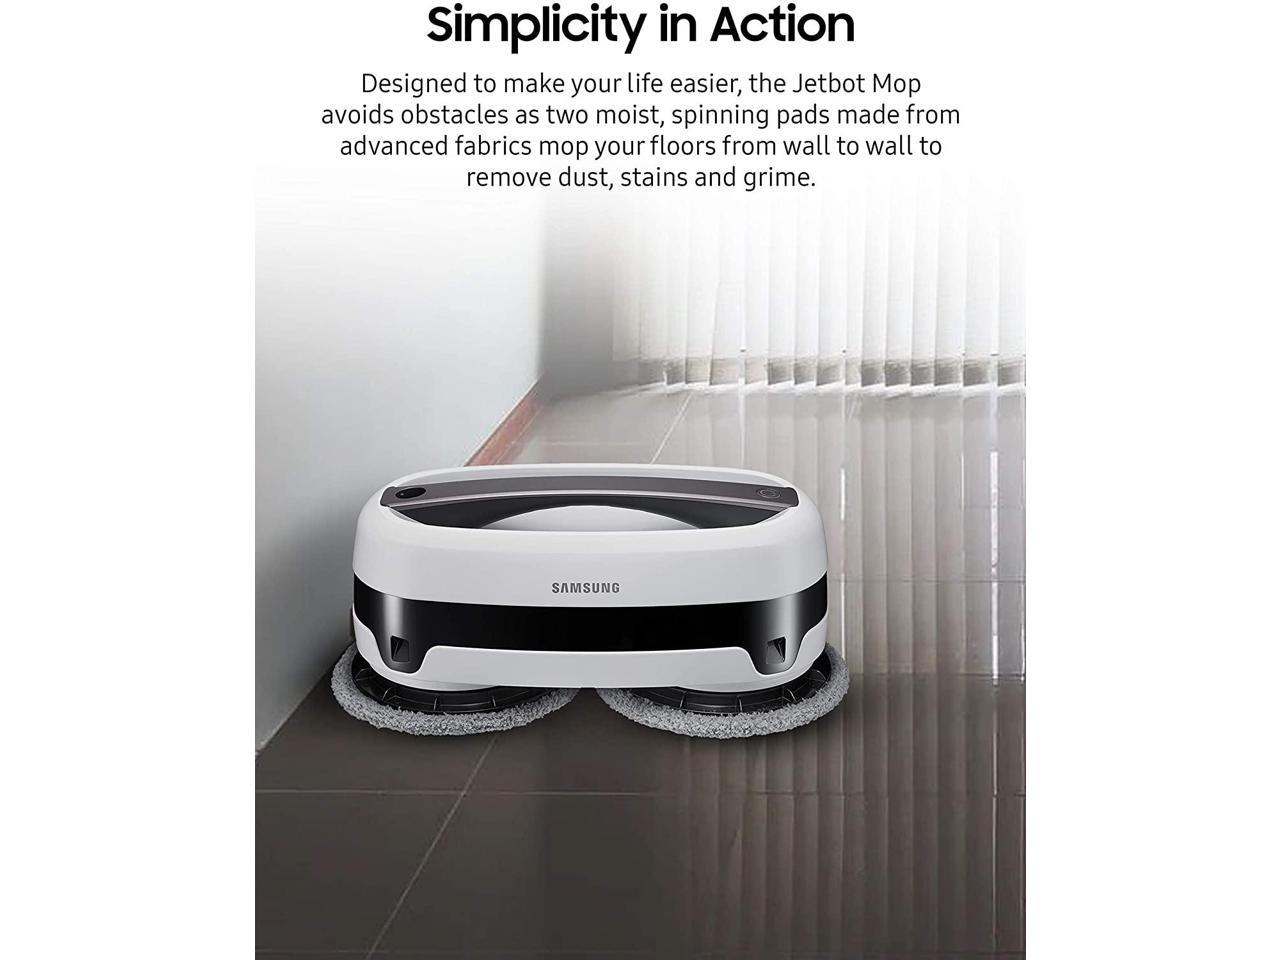 VR20T6001MW/AA NEW Samsung Jetbot Mop with Dual Spinning Technology in white 